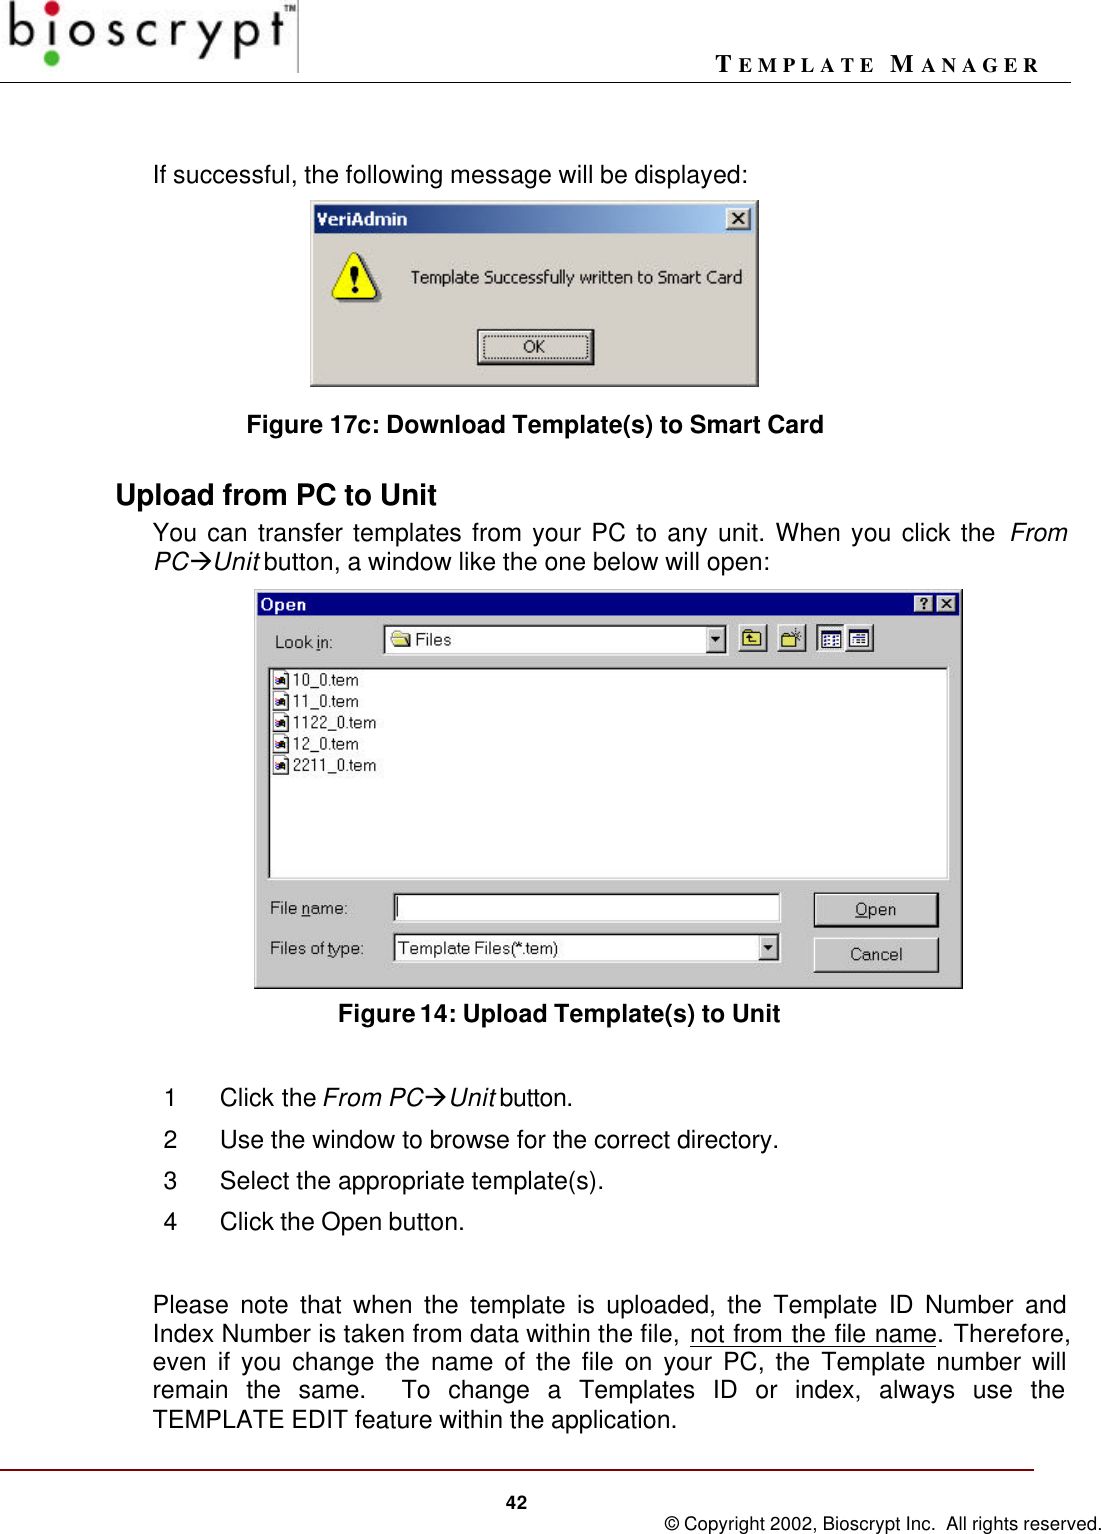 TEMPLATE MANAGER42 © Copyright 2002, Bioscrypt Inc.  All rights reserved.If successful, the following message will be displayed:Figure 17c: Download Template(s) to Smart CardUpload from PC to UnitYou can transfer templates from your PC to any unit. When you click the FromPCàUnit button, a window like the one below will open:     Figure 14: Upload Template(s) to Unit1Click the From PCàUnit button.2Use the window to browse for the correct directory.3Select the appropriate template(s).4Click the Open button.Please note that when the template is uploaded, the Template ID Number andIndex Number is taken from data within the file, not from the file name. Therefore,even if you change the name of the file on your PC, the Template number willremain the same.  To change a Templates ID or index, always use theTEMPLATE EDIT feature within the application.